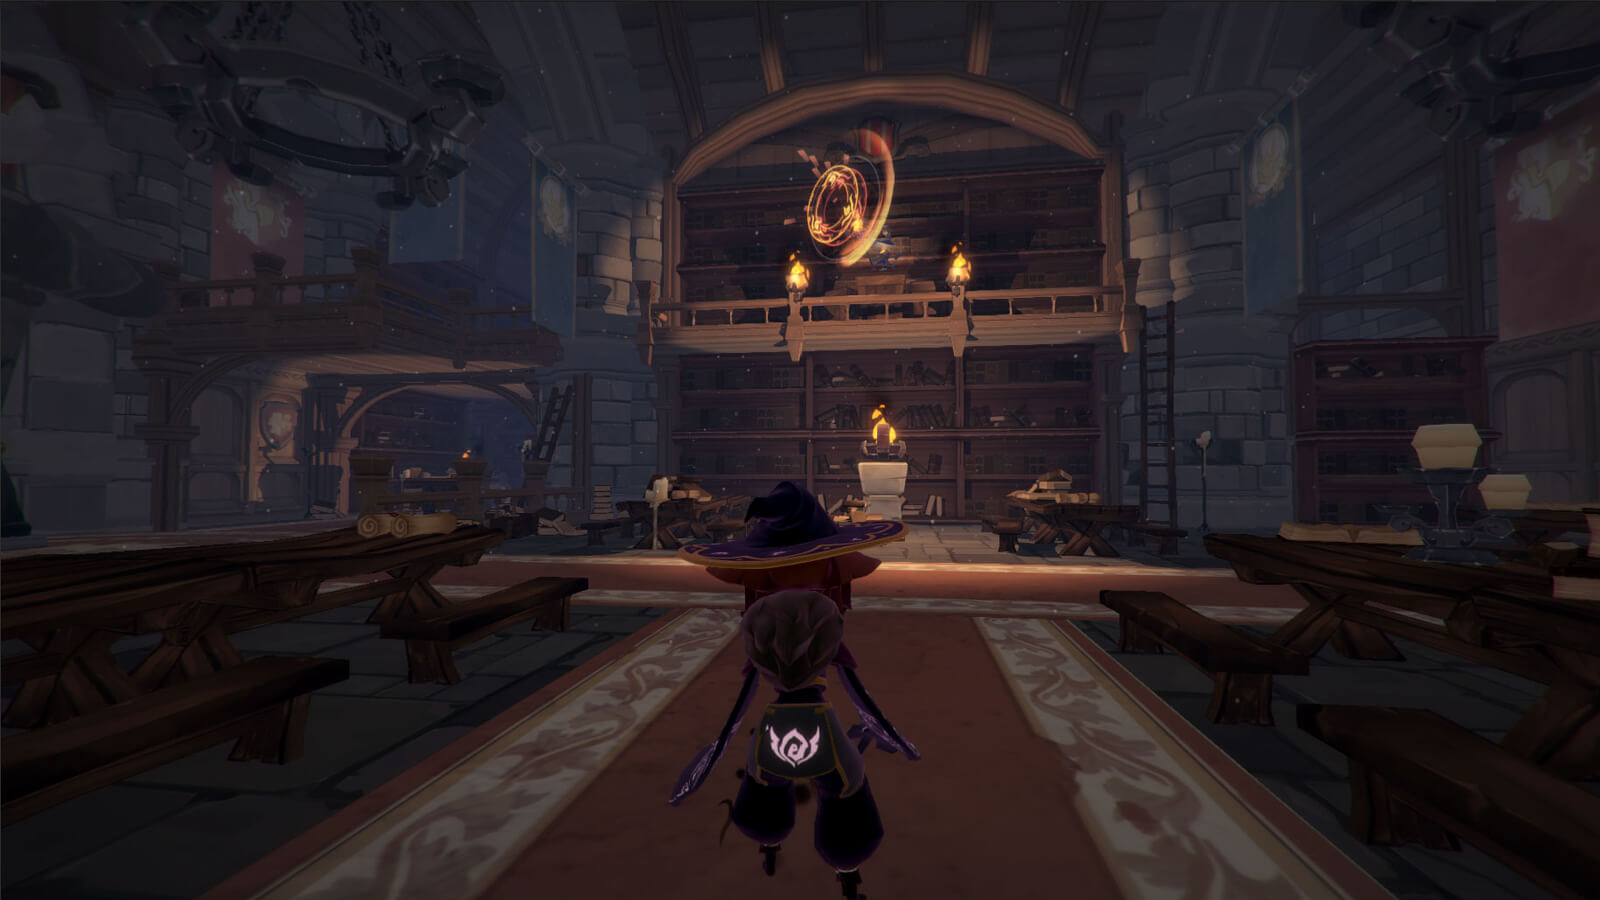 View of the player's character from behind standing in a torch-lit library with several tables and benches nearby